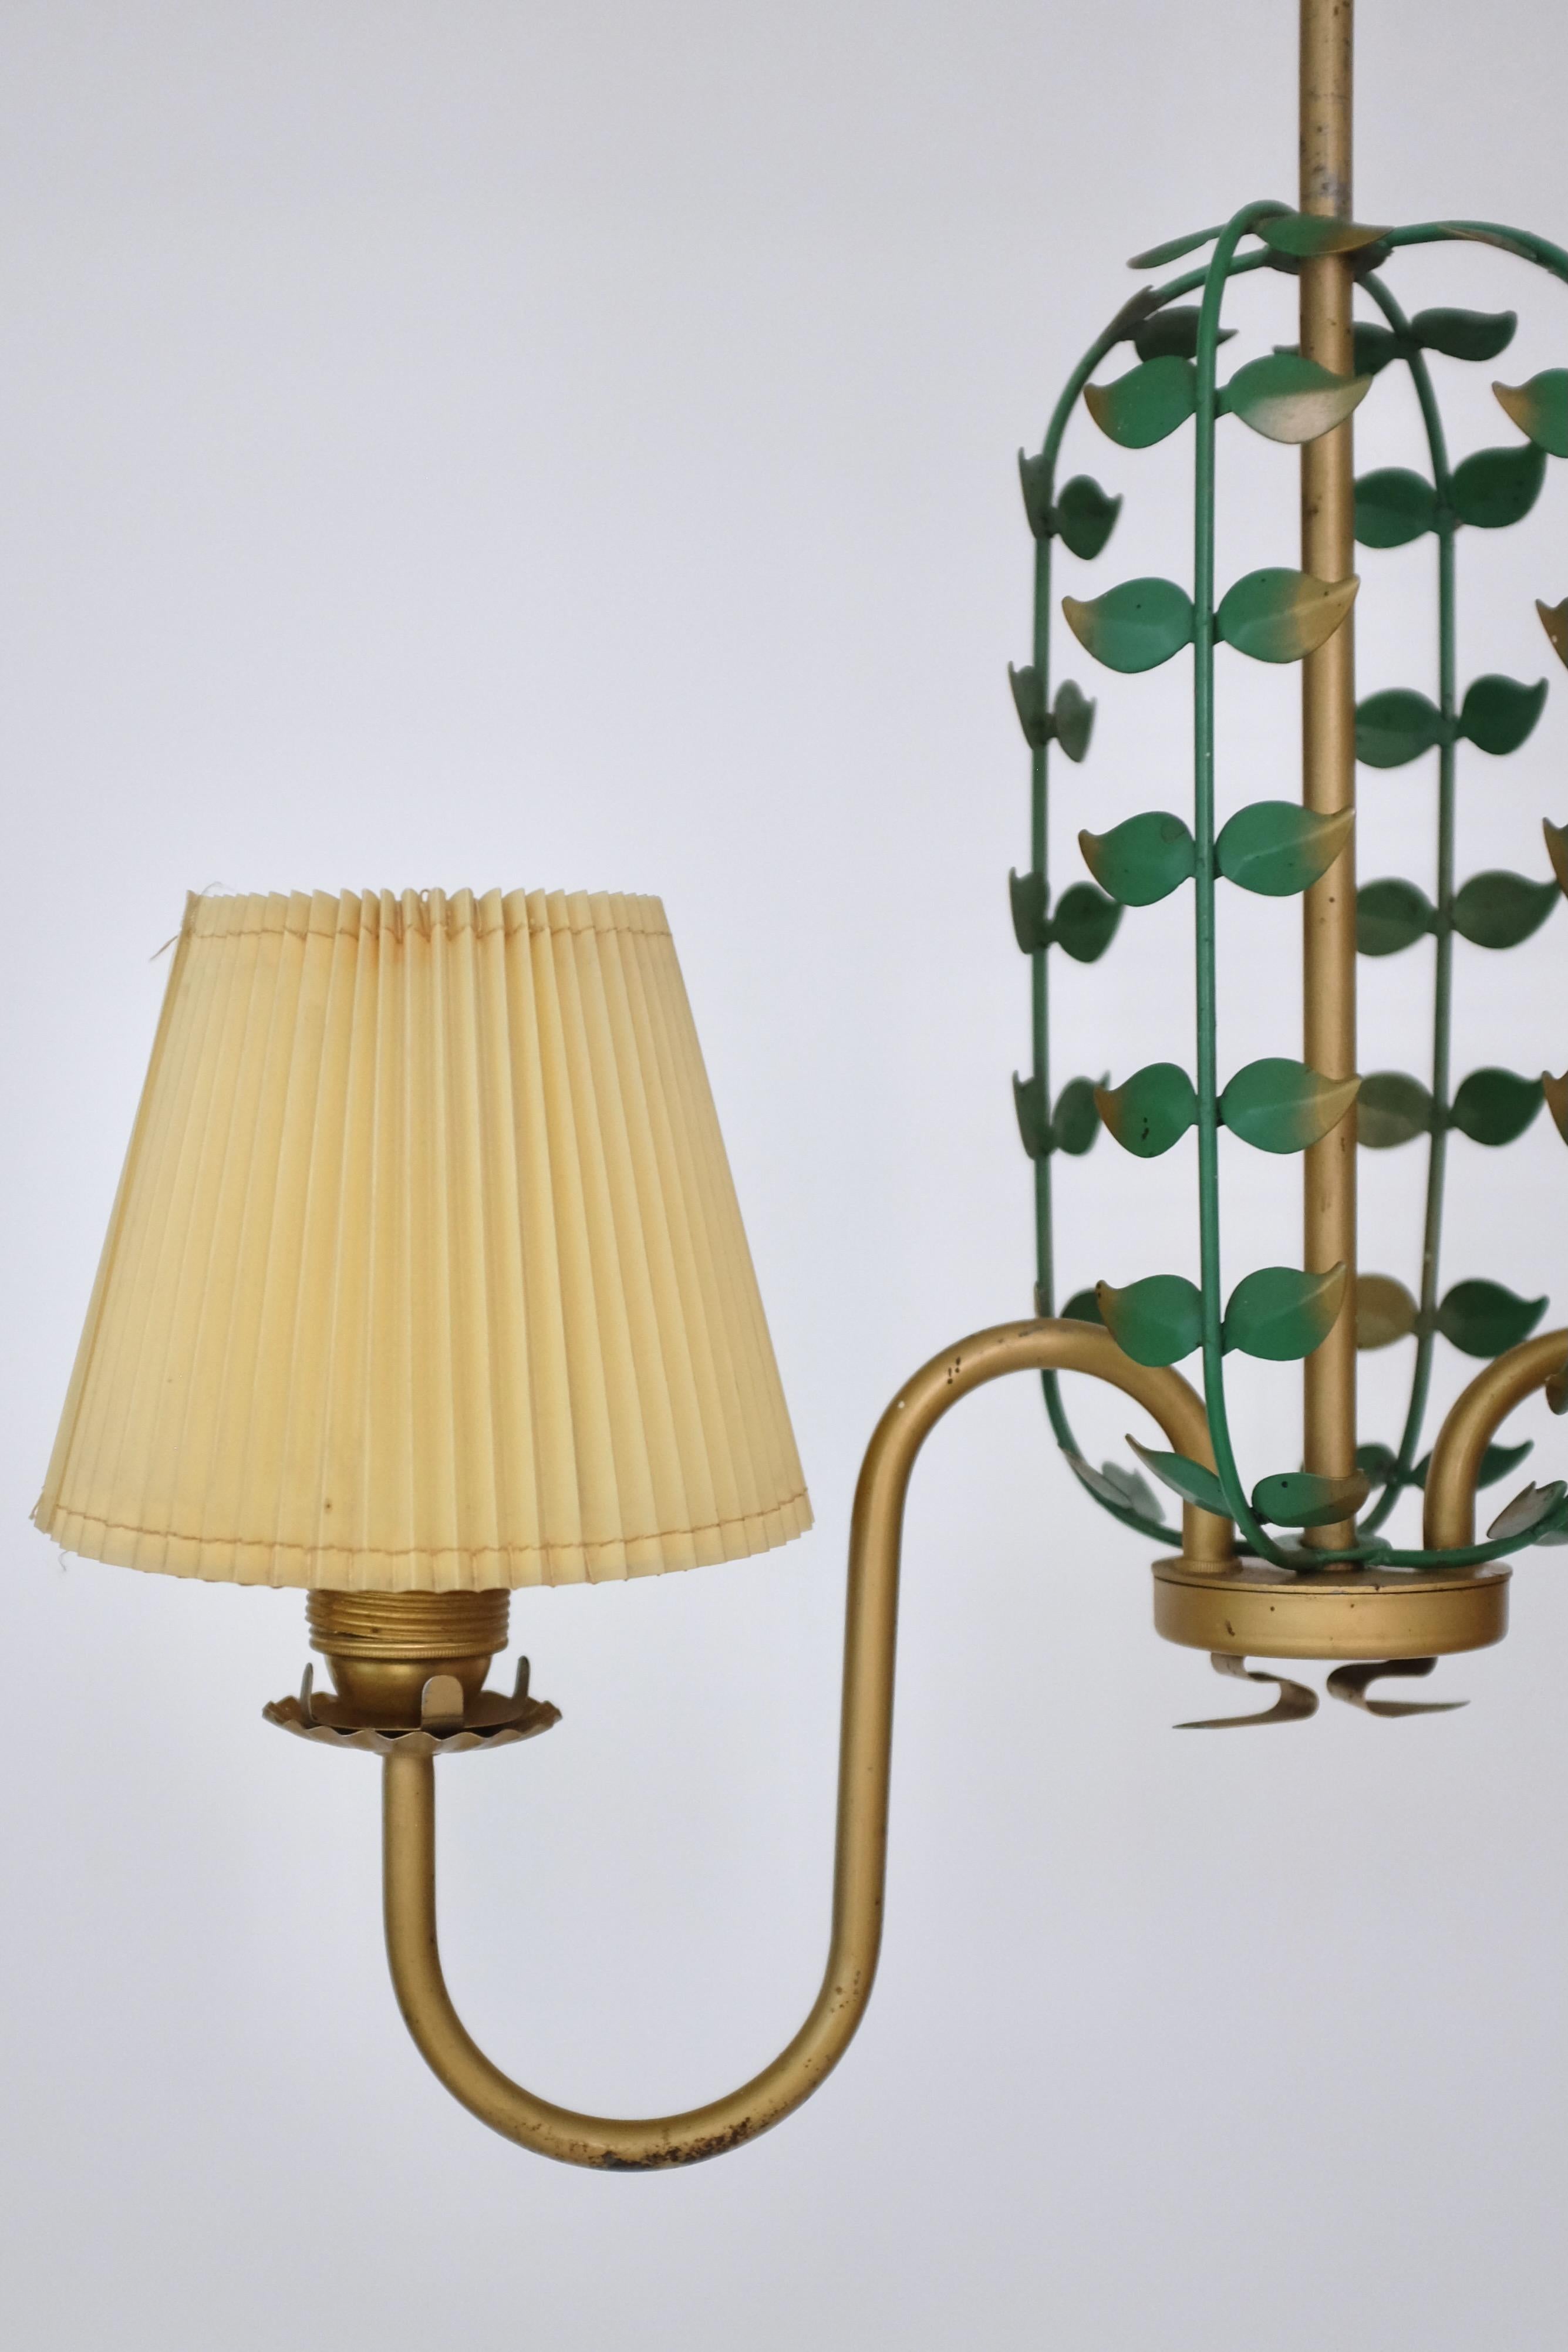 Swedish Modern Pendant with a decorative Leaf Cage between two curved lamp arms. Painted metal in gold and green with original pleated plastic shades possibly for outdoor use. Very decorative and showcasing the soft elegant lines of Swedish mid-20th